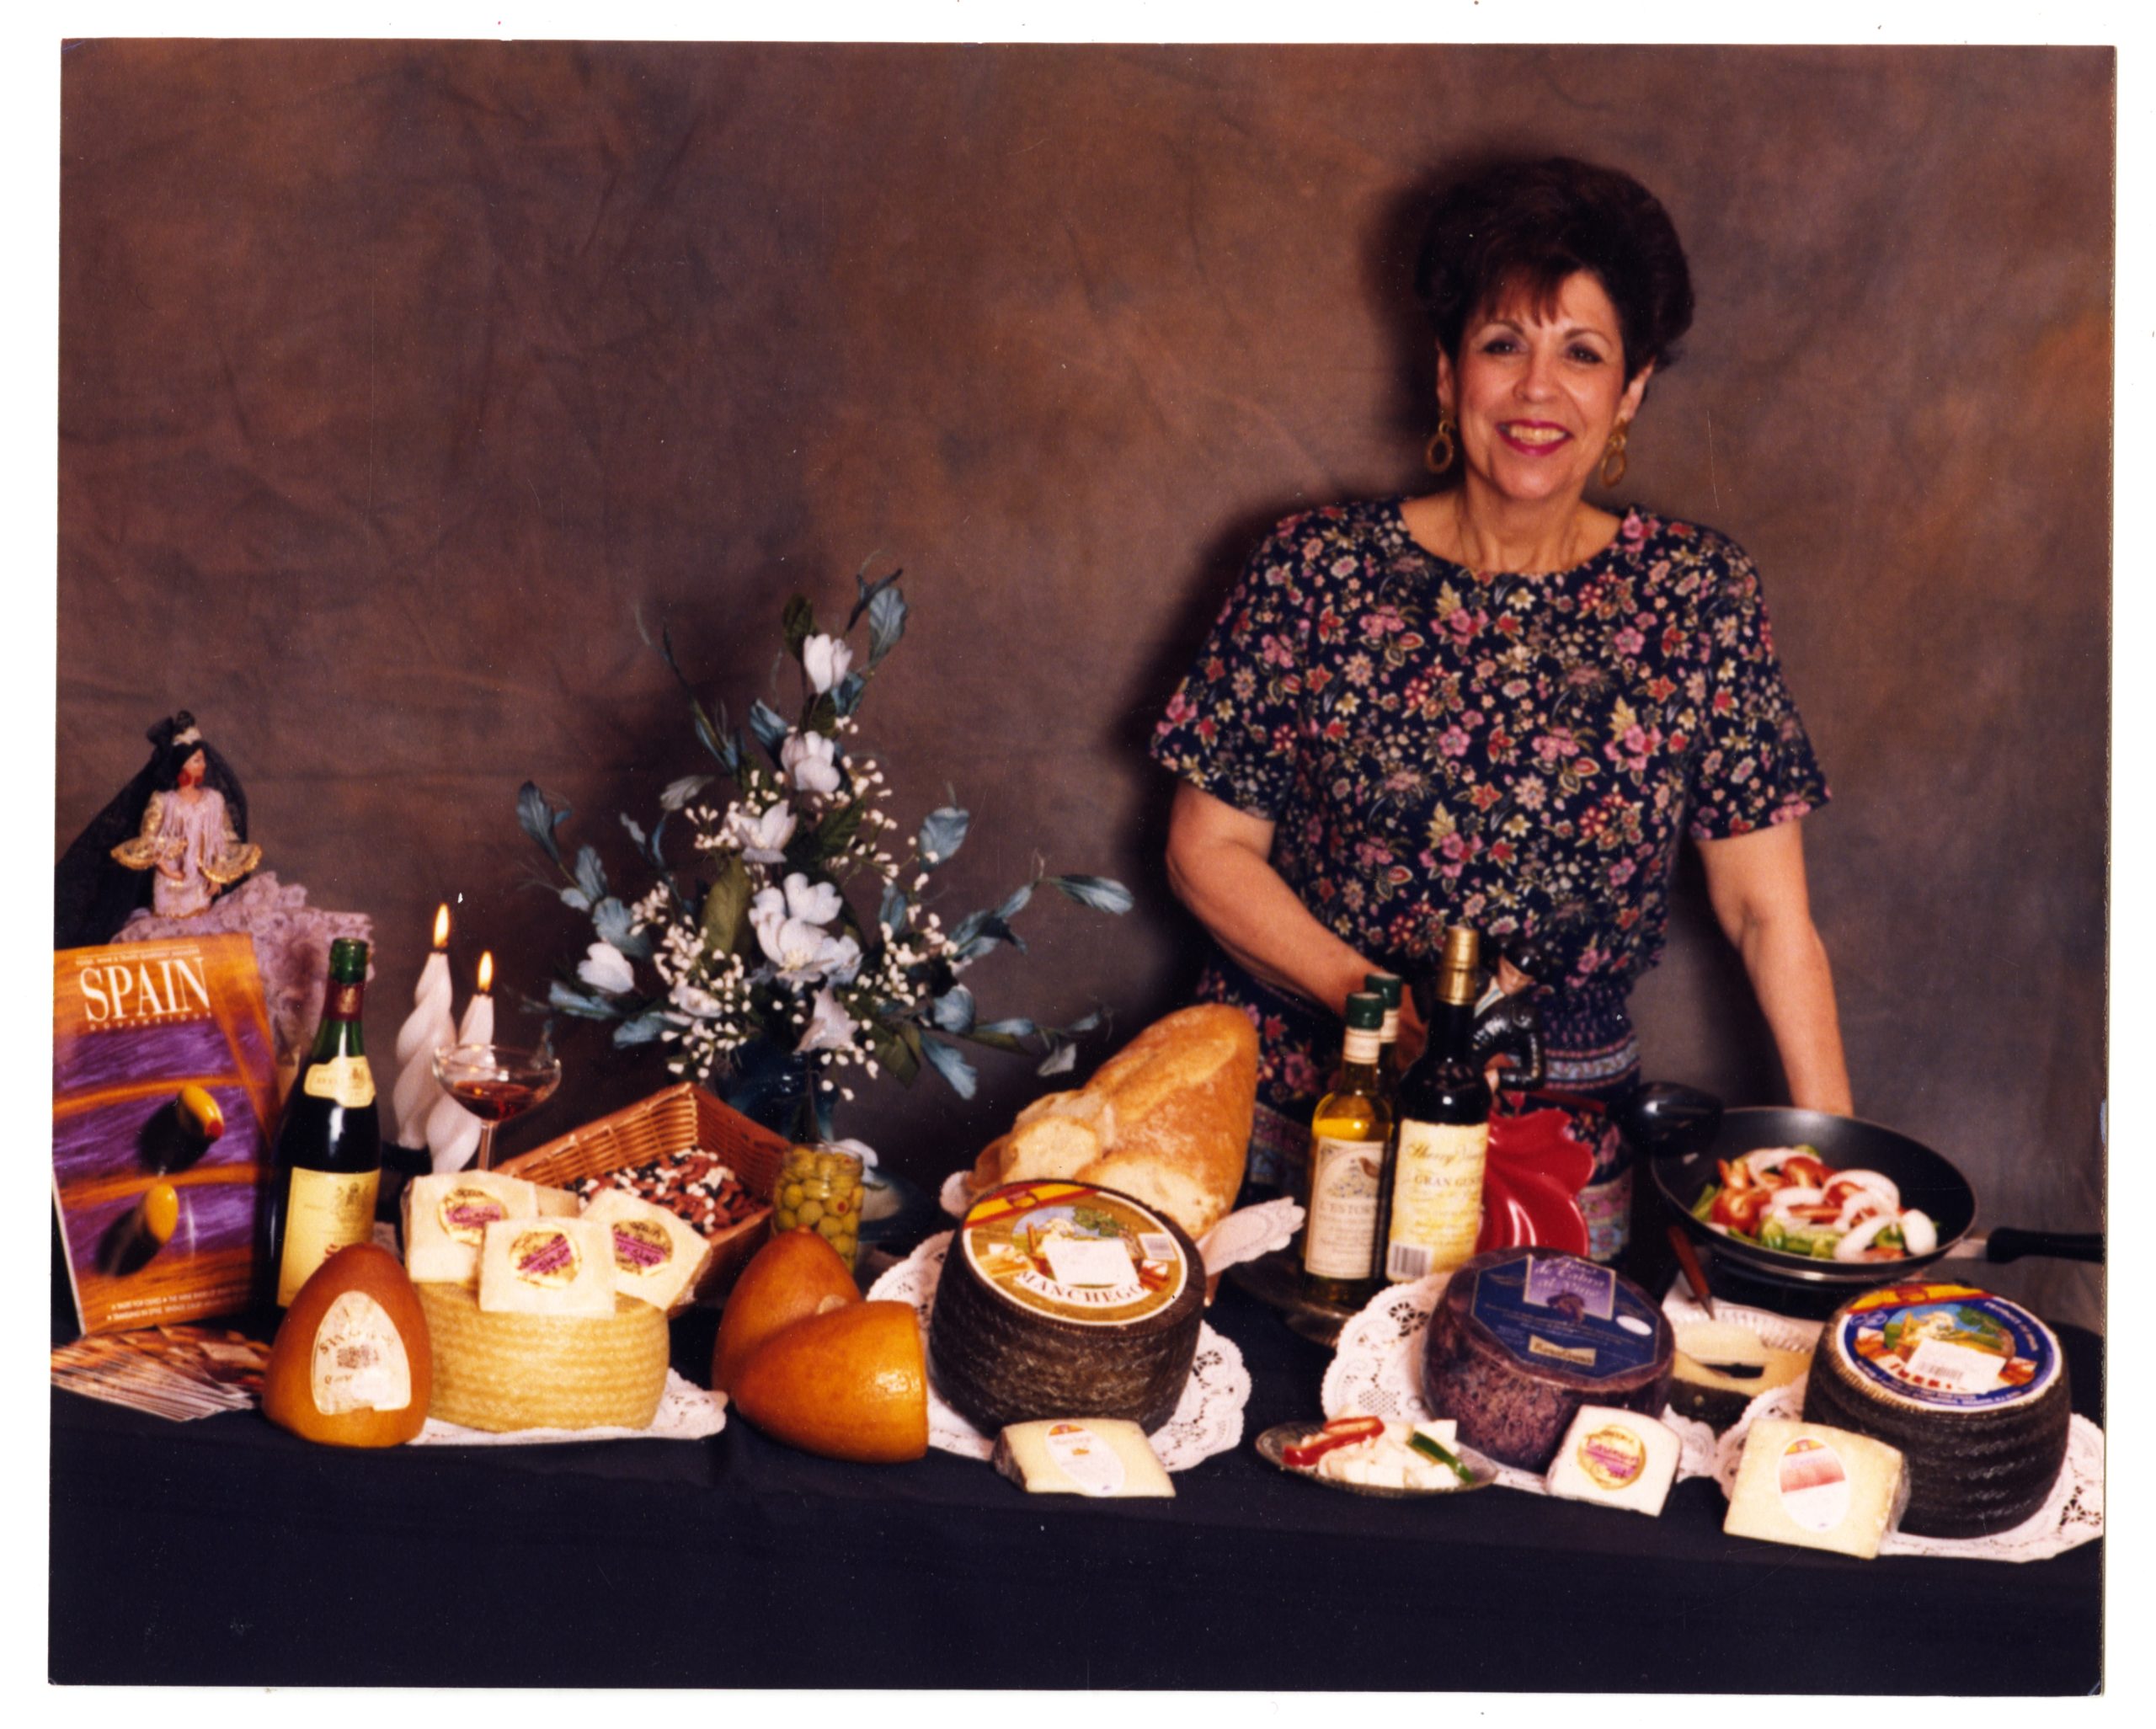 Store employee Raye Coffey preparing gourmet food for a promotional photo shoot, 1990s.